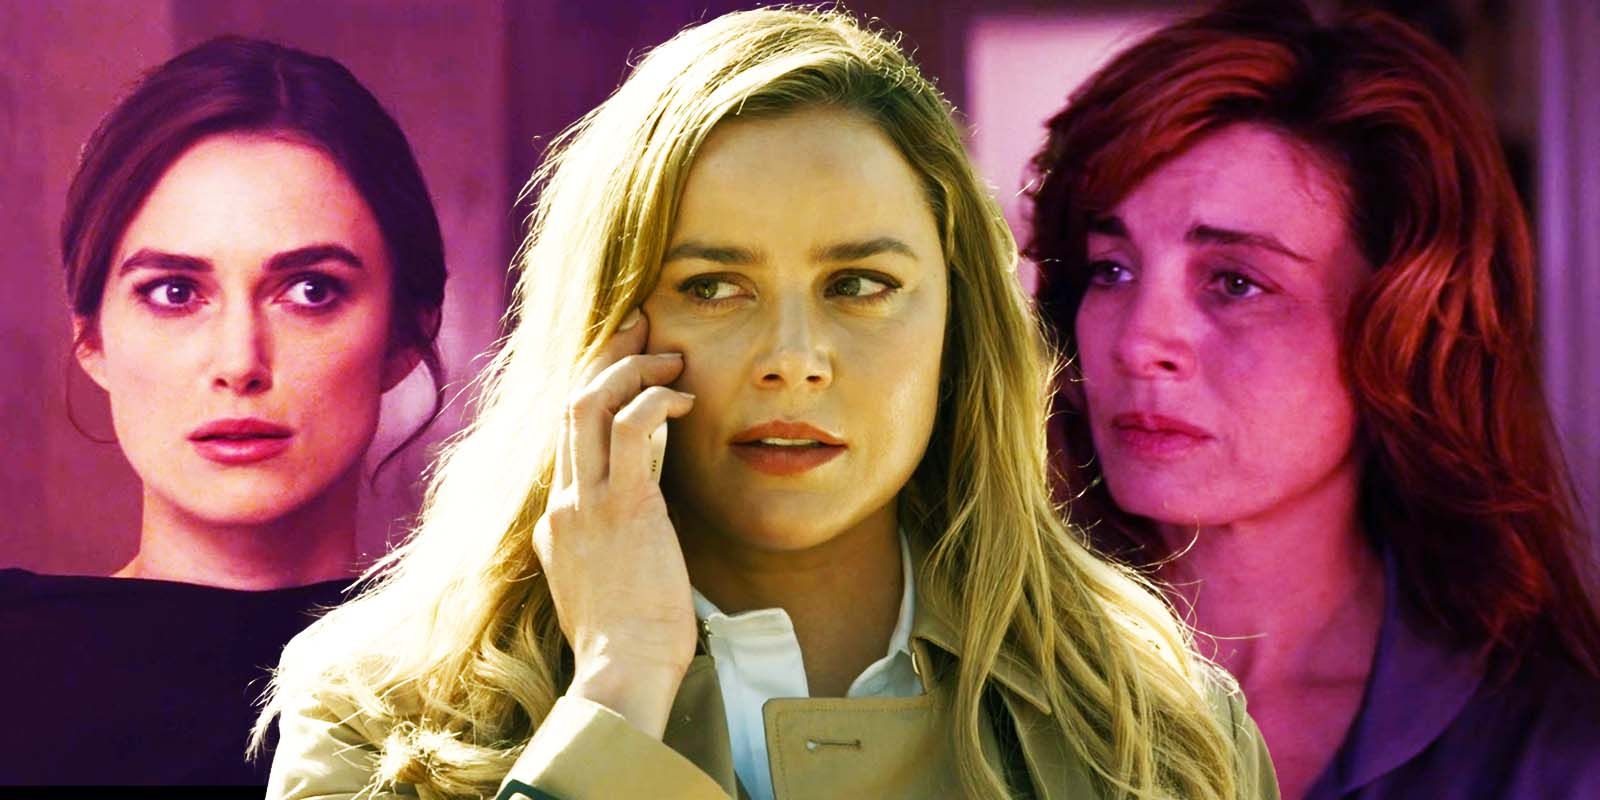 Keira Knightley as Cathy Muller in Jack Ryan Shadow Recruit, Abbie Cornish as Cathy Mueller in Tom Clancy's Jack Ryan, and Anne Archer as Cathy Ryan in Patriot Games